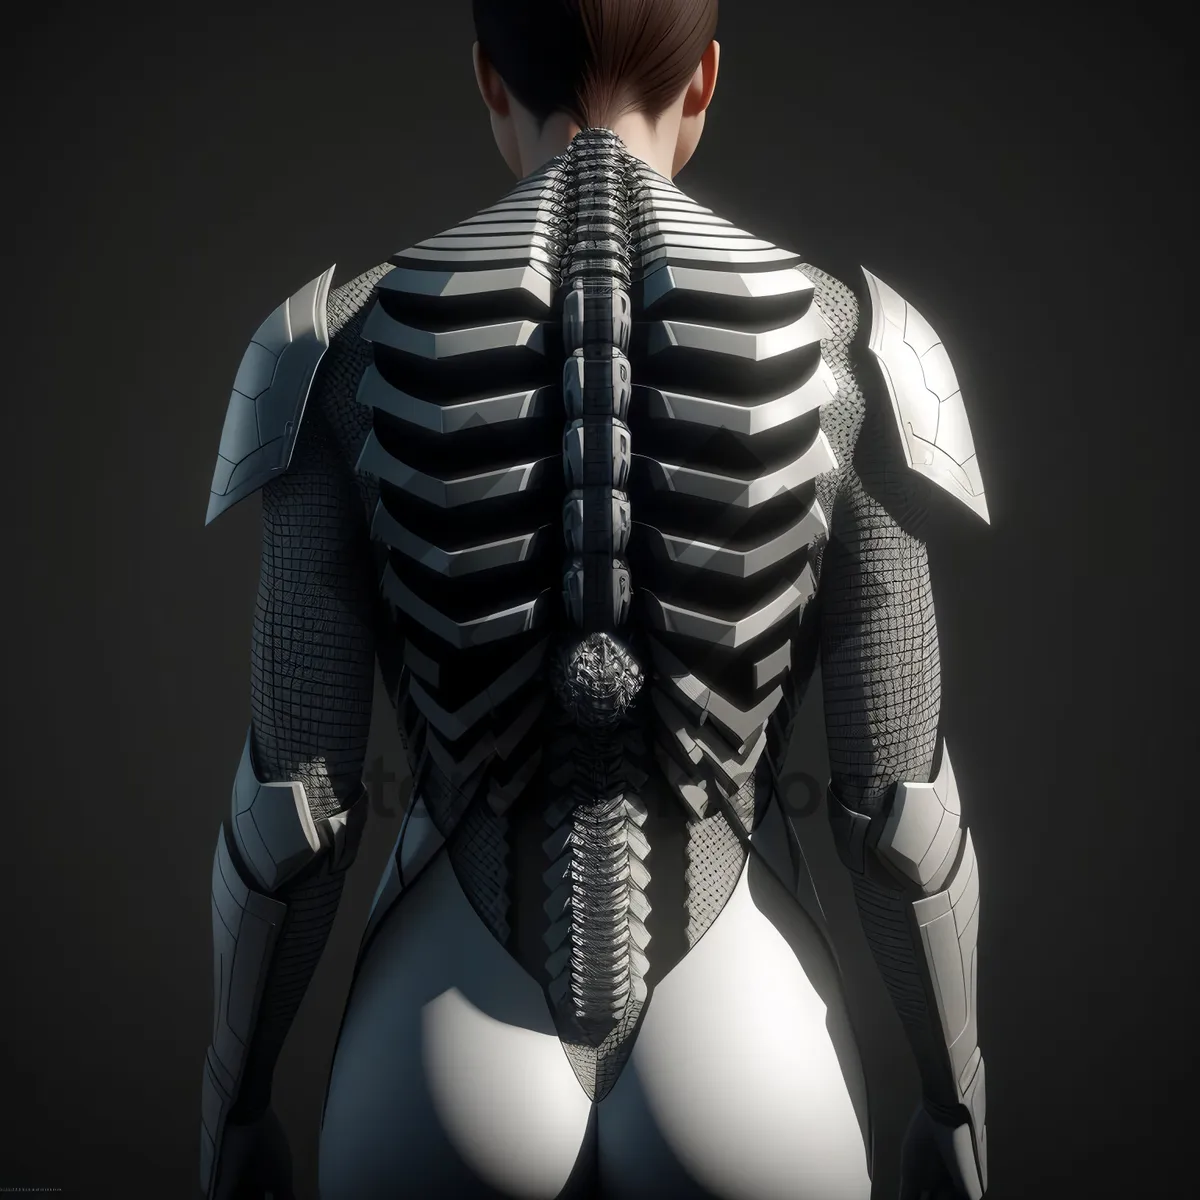 Picture of Black Leather Body Armor Protection for Male Anatomy